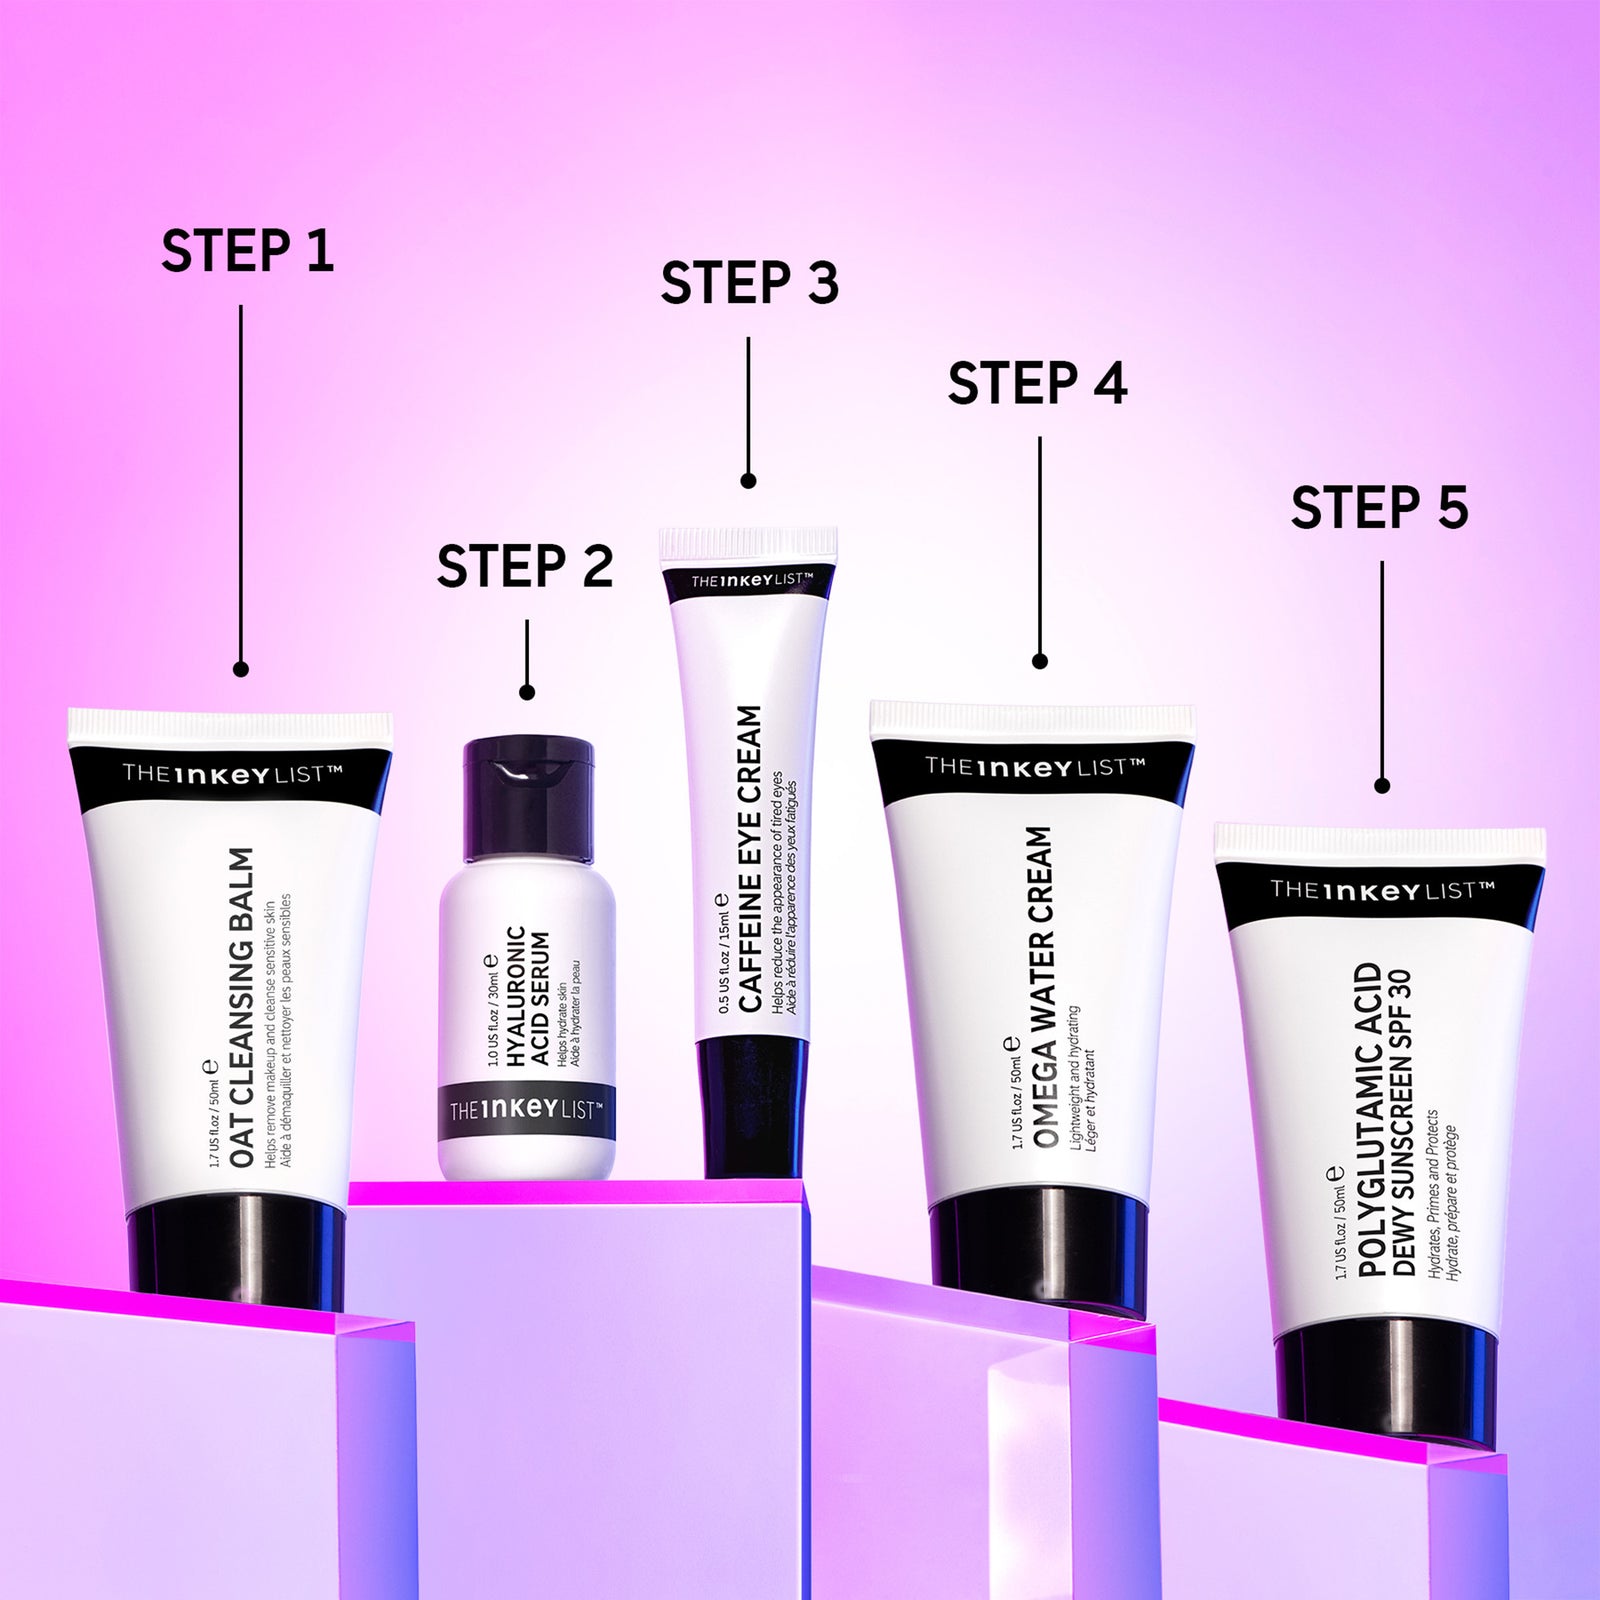 The Intro Routine products